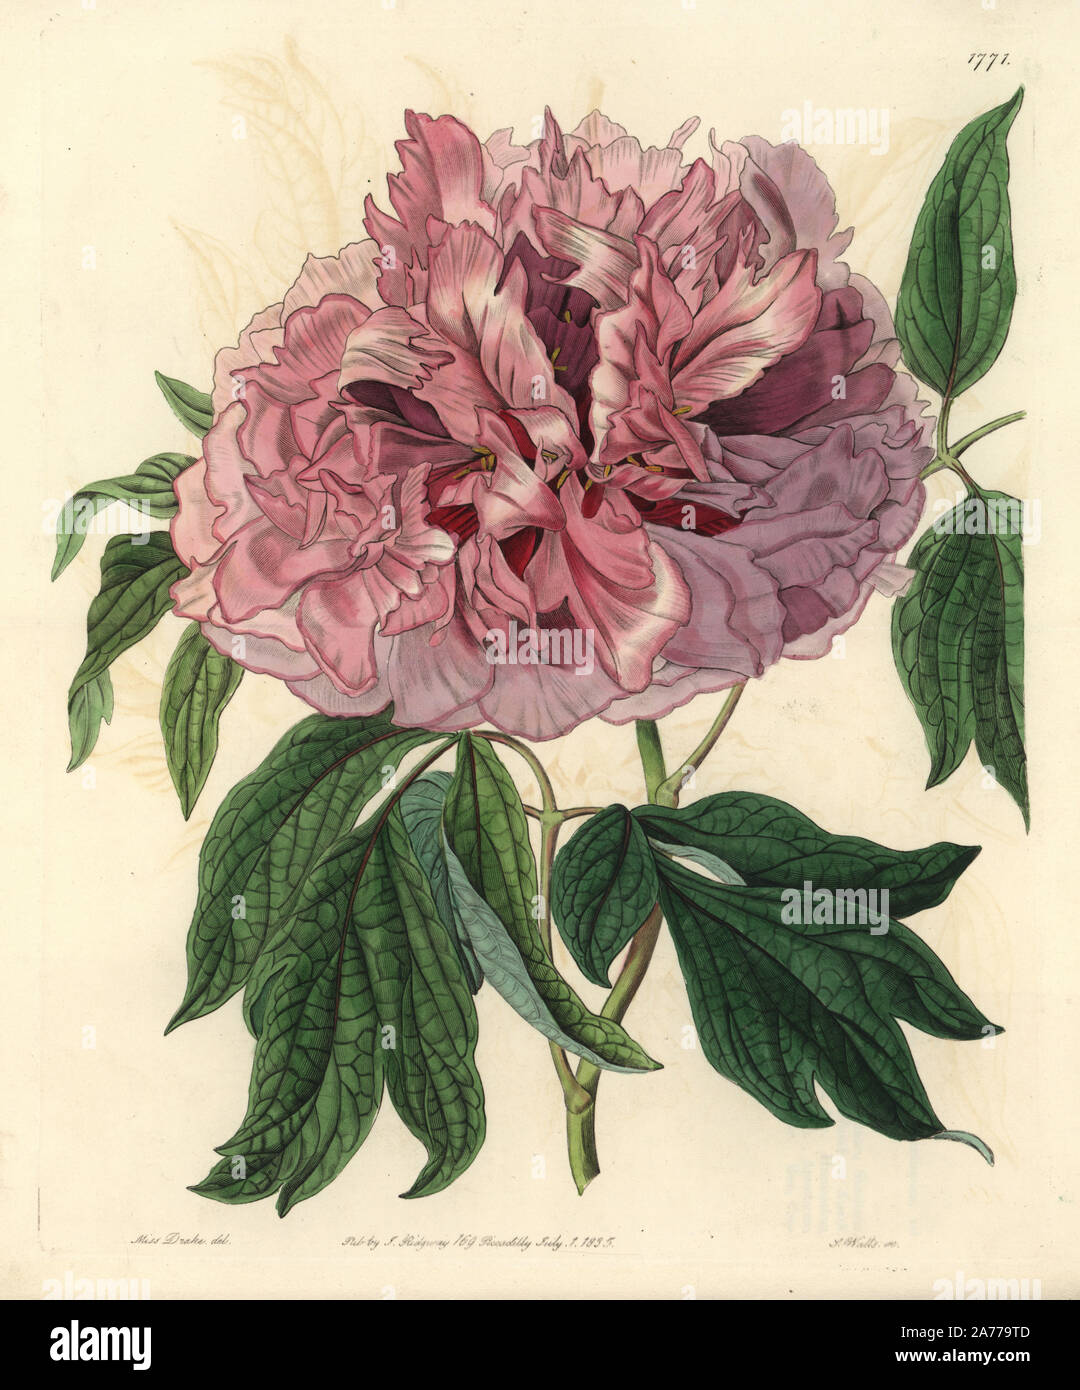 Moutan peony, Paeonia suffruticosa Andrews var. lacera (Double-red curled tree peony, Paeonia moutan lacera). Handcoloured copperplate engraving by S. Watts after an illustration by Miss Drake from Sydenham Edwards' 'The Botanical Register,' London, Ridgway, 1835. Sarah Anne Drake (1803-1857) drew over 1,300 plates for the botanist John Lindley, including many orchids. Stock Photo